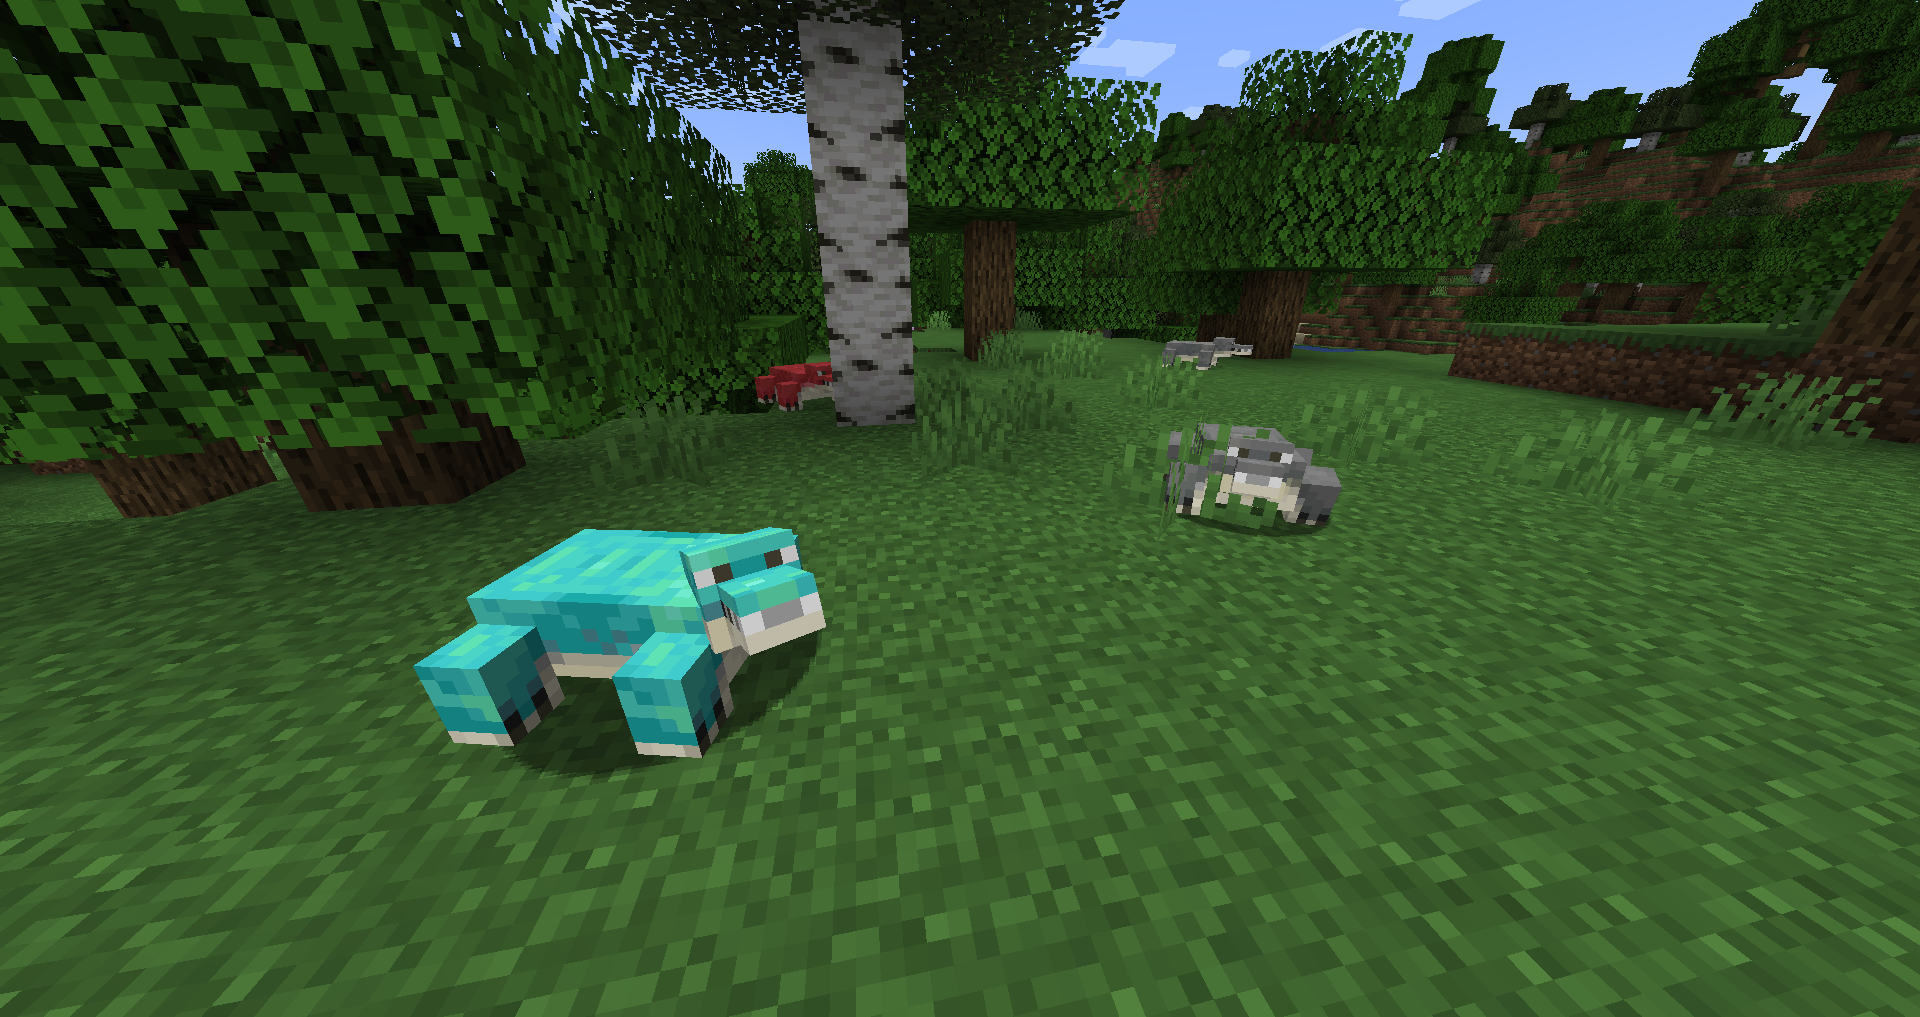 They spawn in forest biomes.